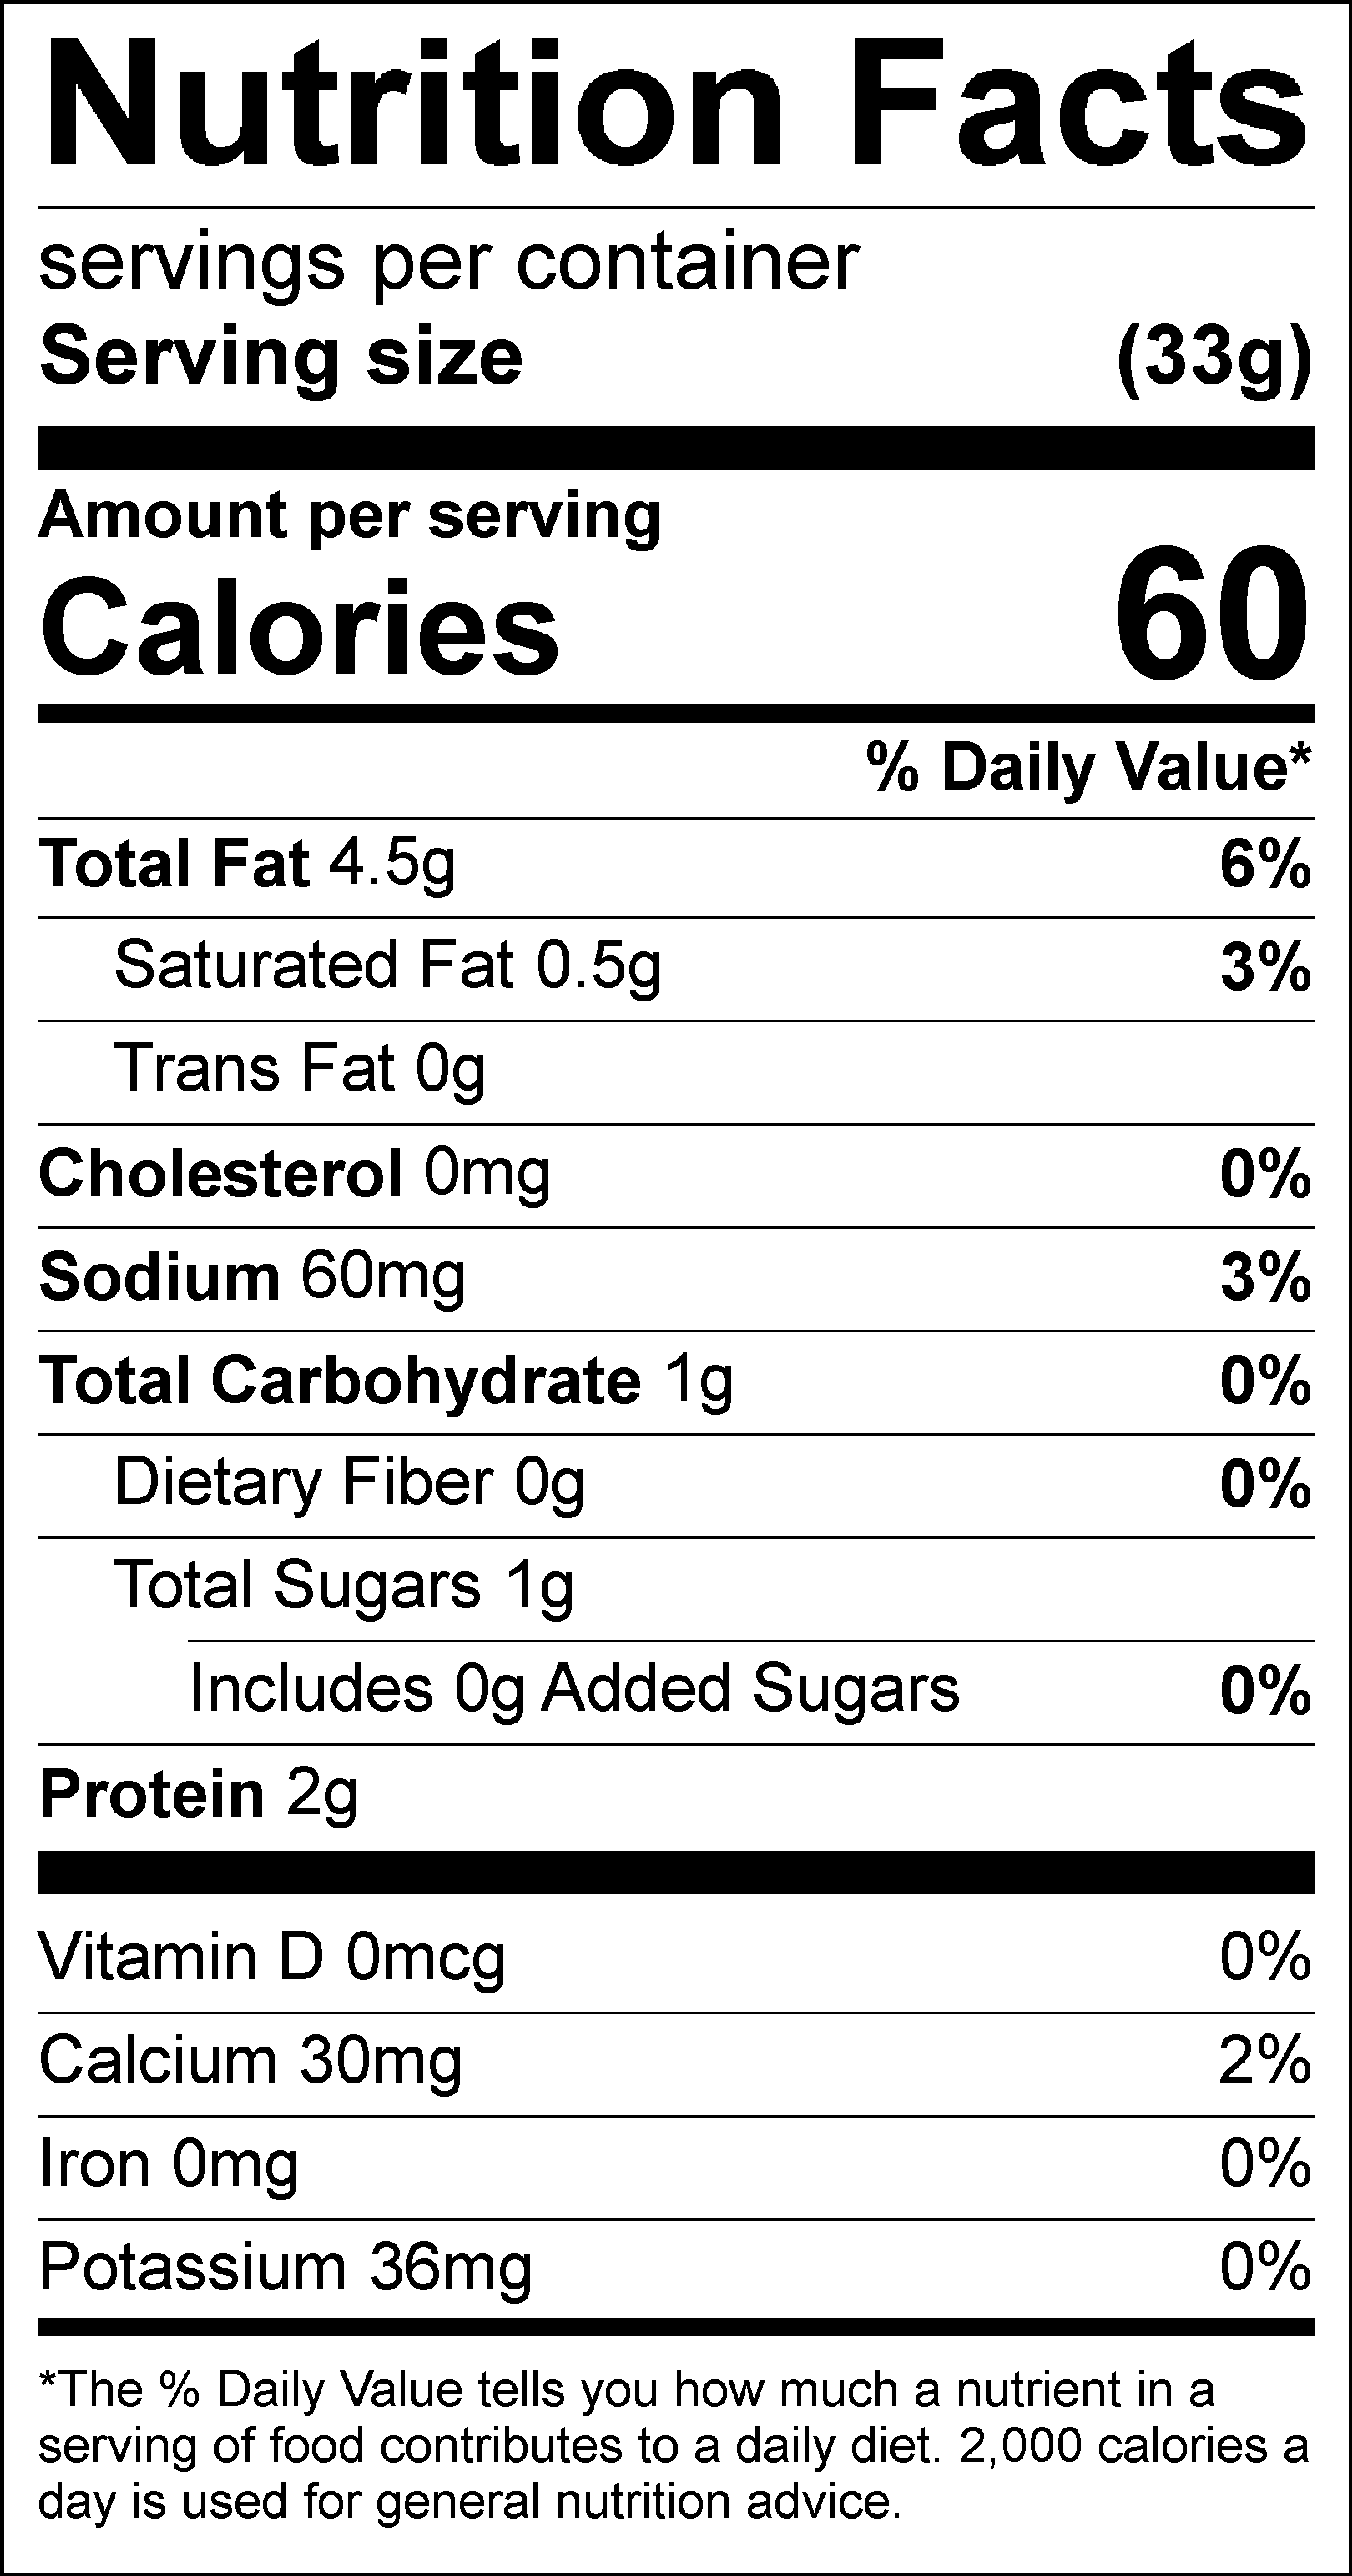 Nutrition Facts Label for Ranch Dressing